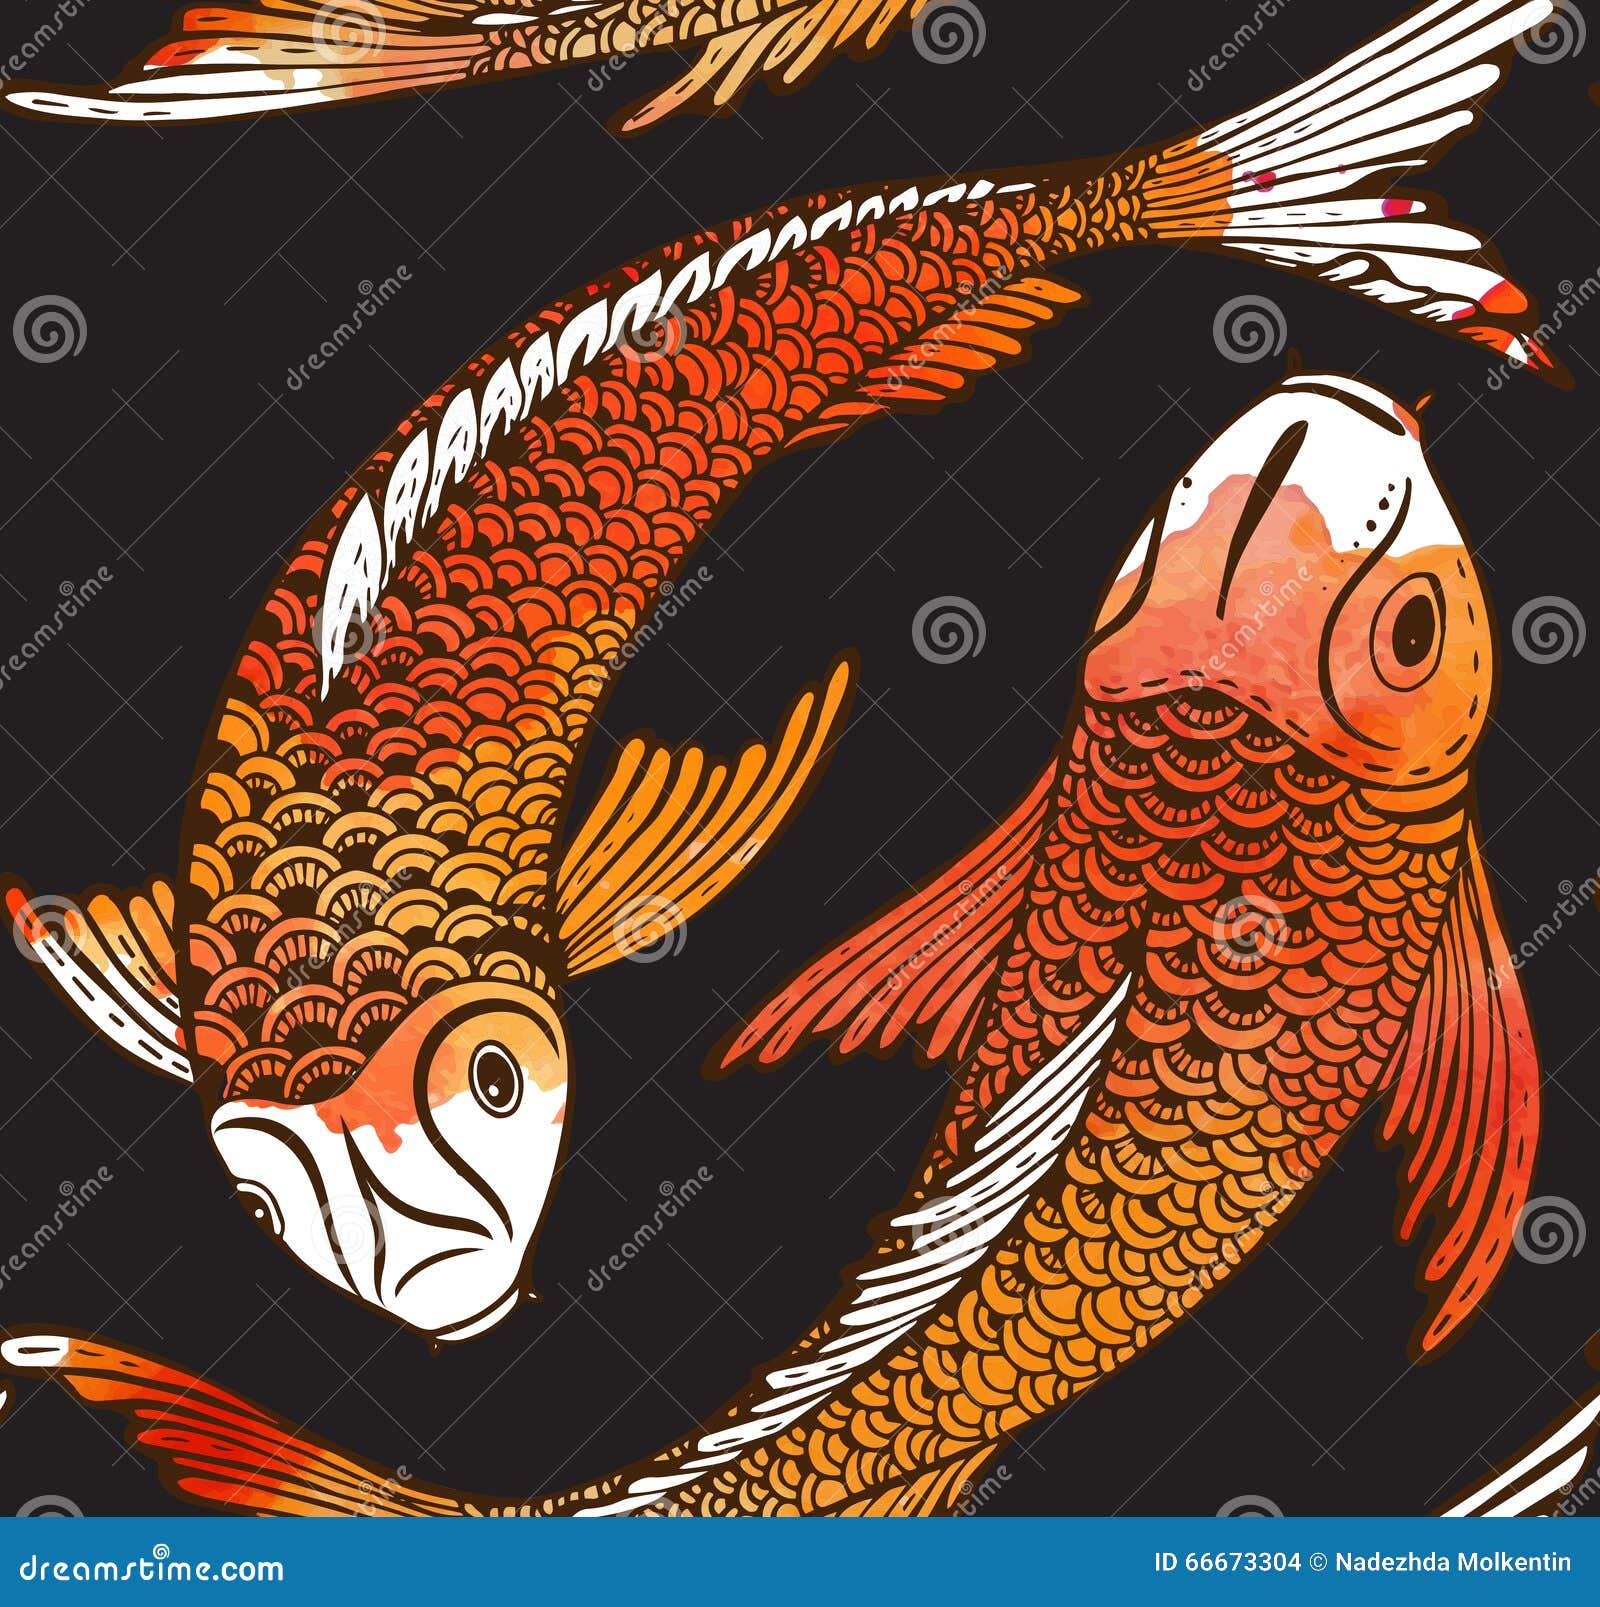 Download Seamless Vector Pattern With Hand Drawn Koi Fish Stock ...